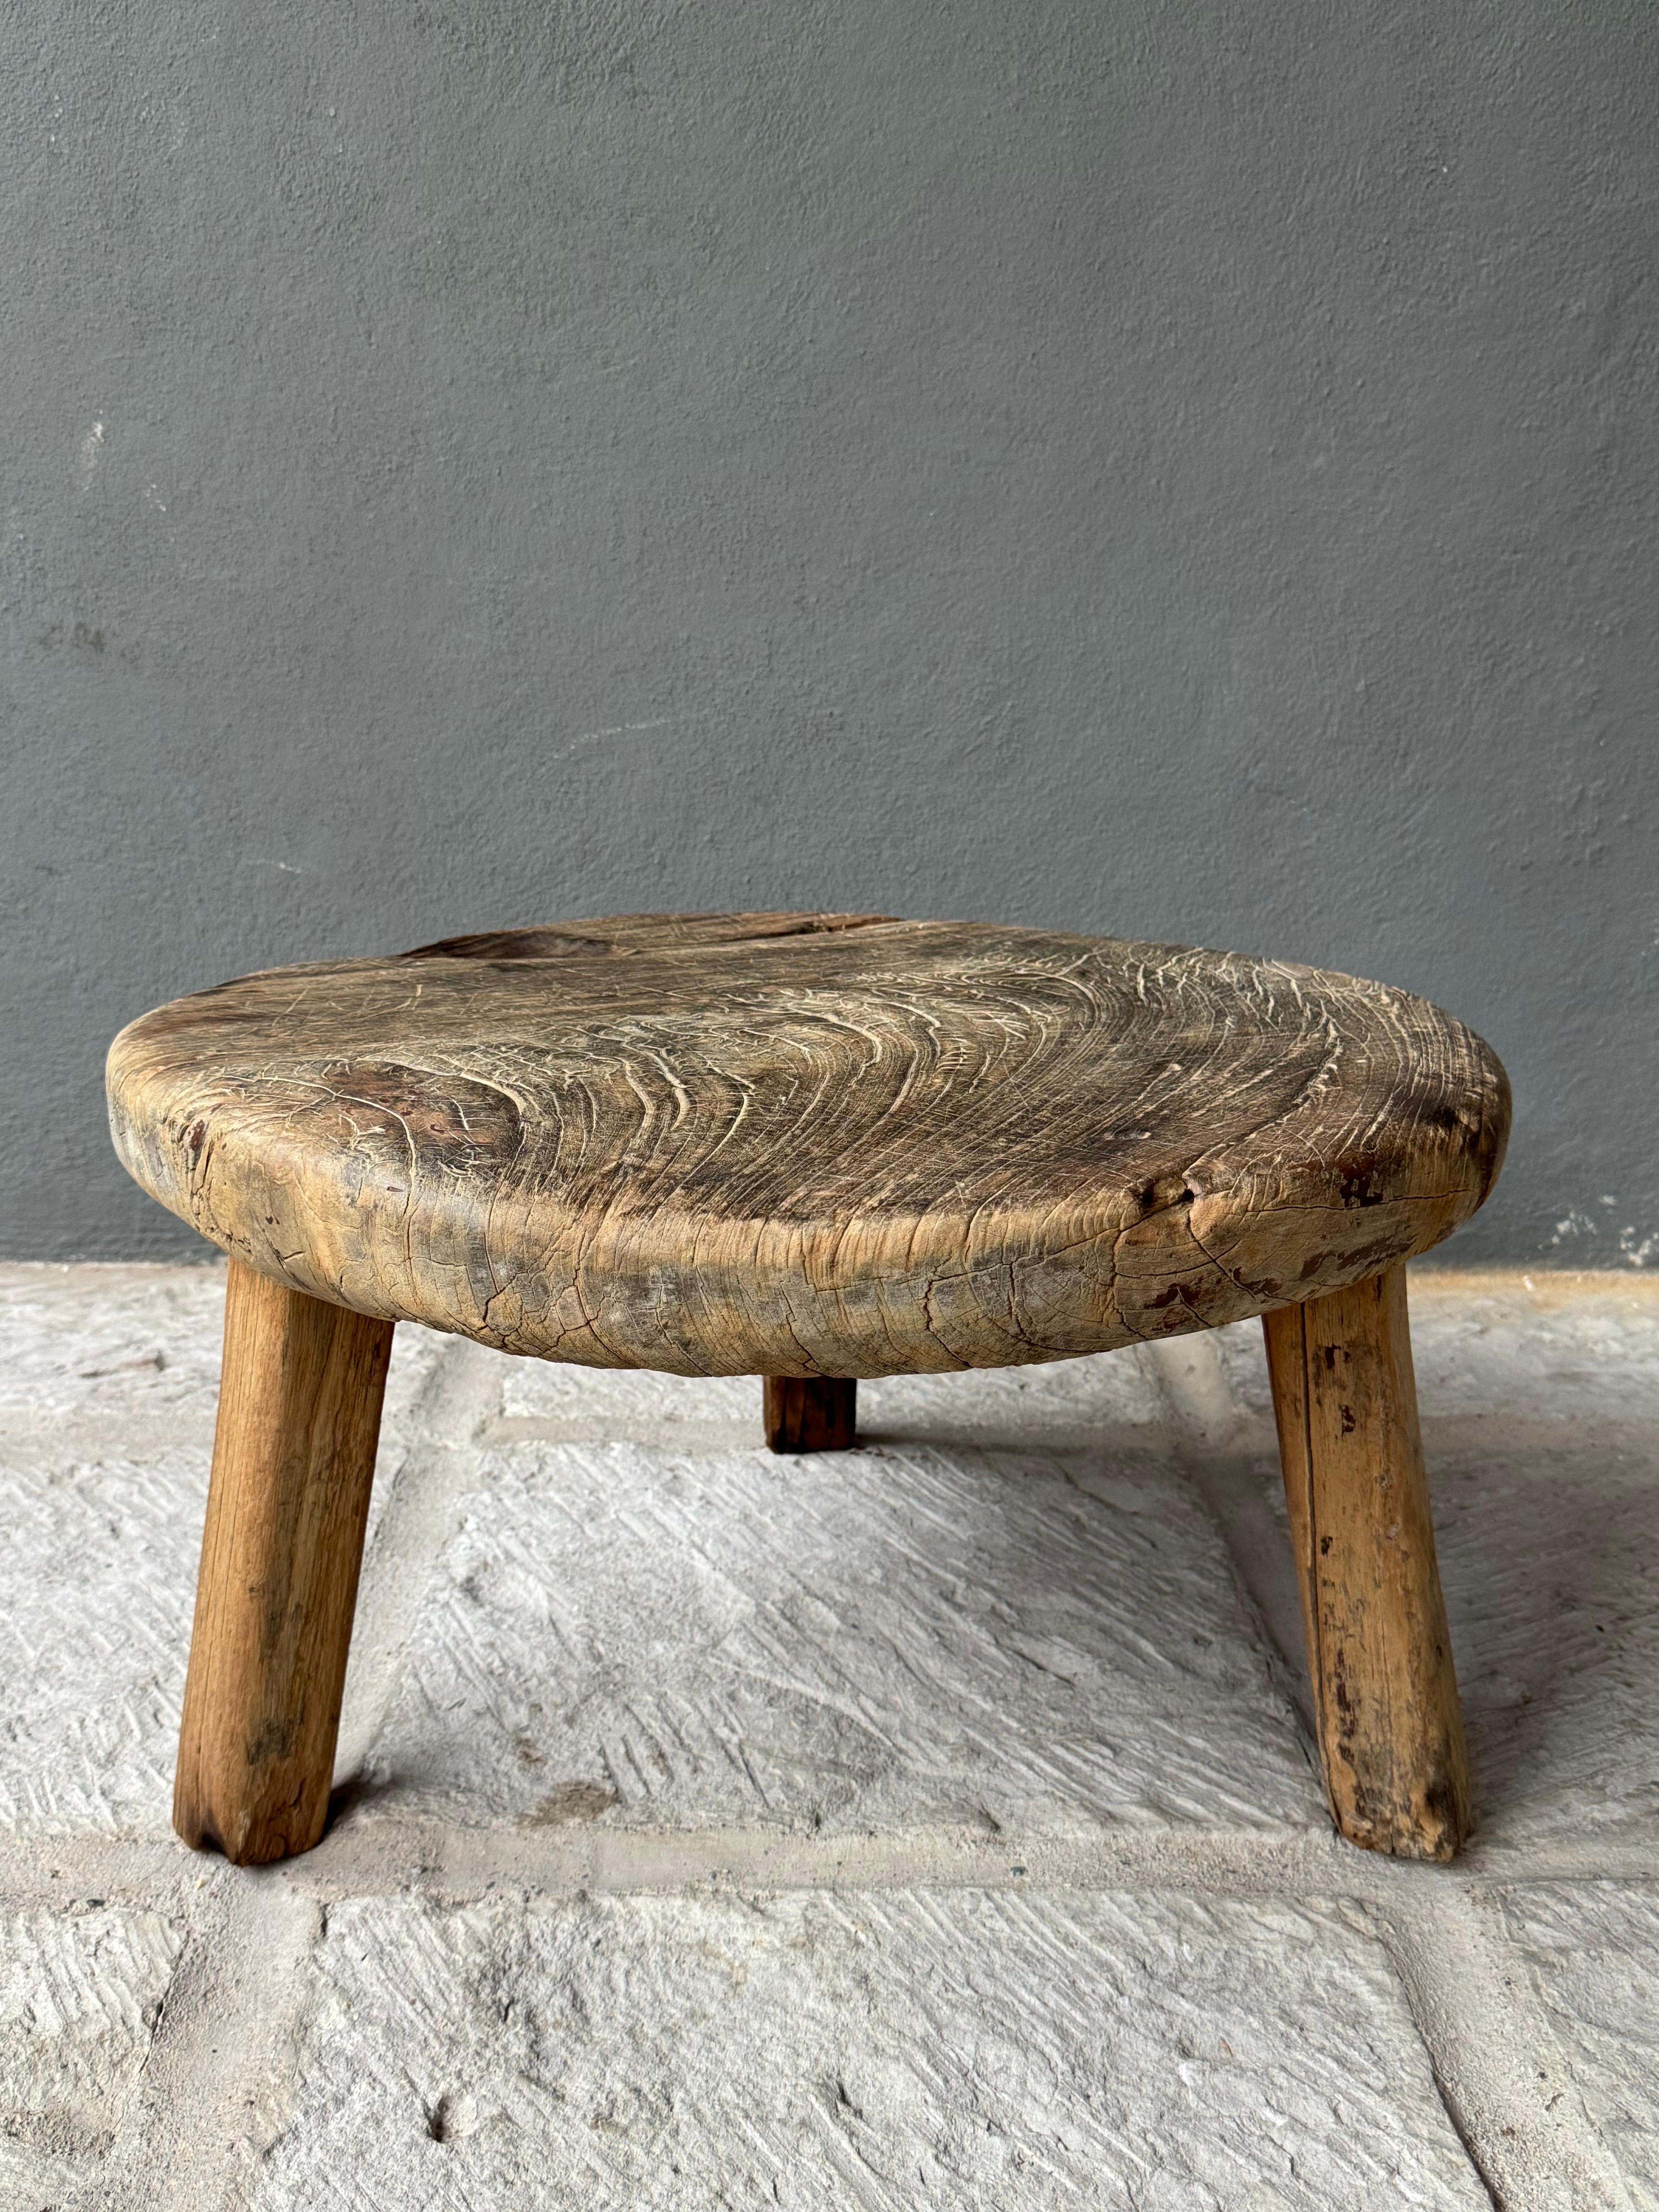 Primitive hardwood round table from Central Yucatan, Mexico, late 20th century.
These tables are all hand-carved and one-of-a-kind. Each piece bears its own soul with regards to the kind of wood that was used, its wear and age, the color scheme